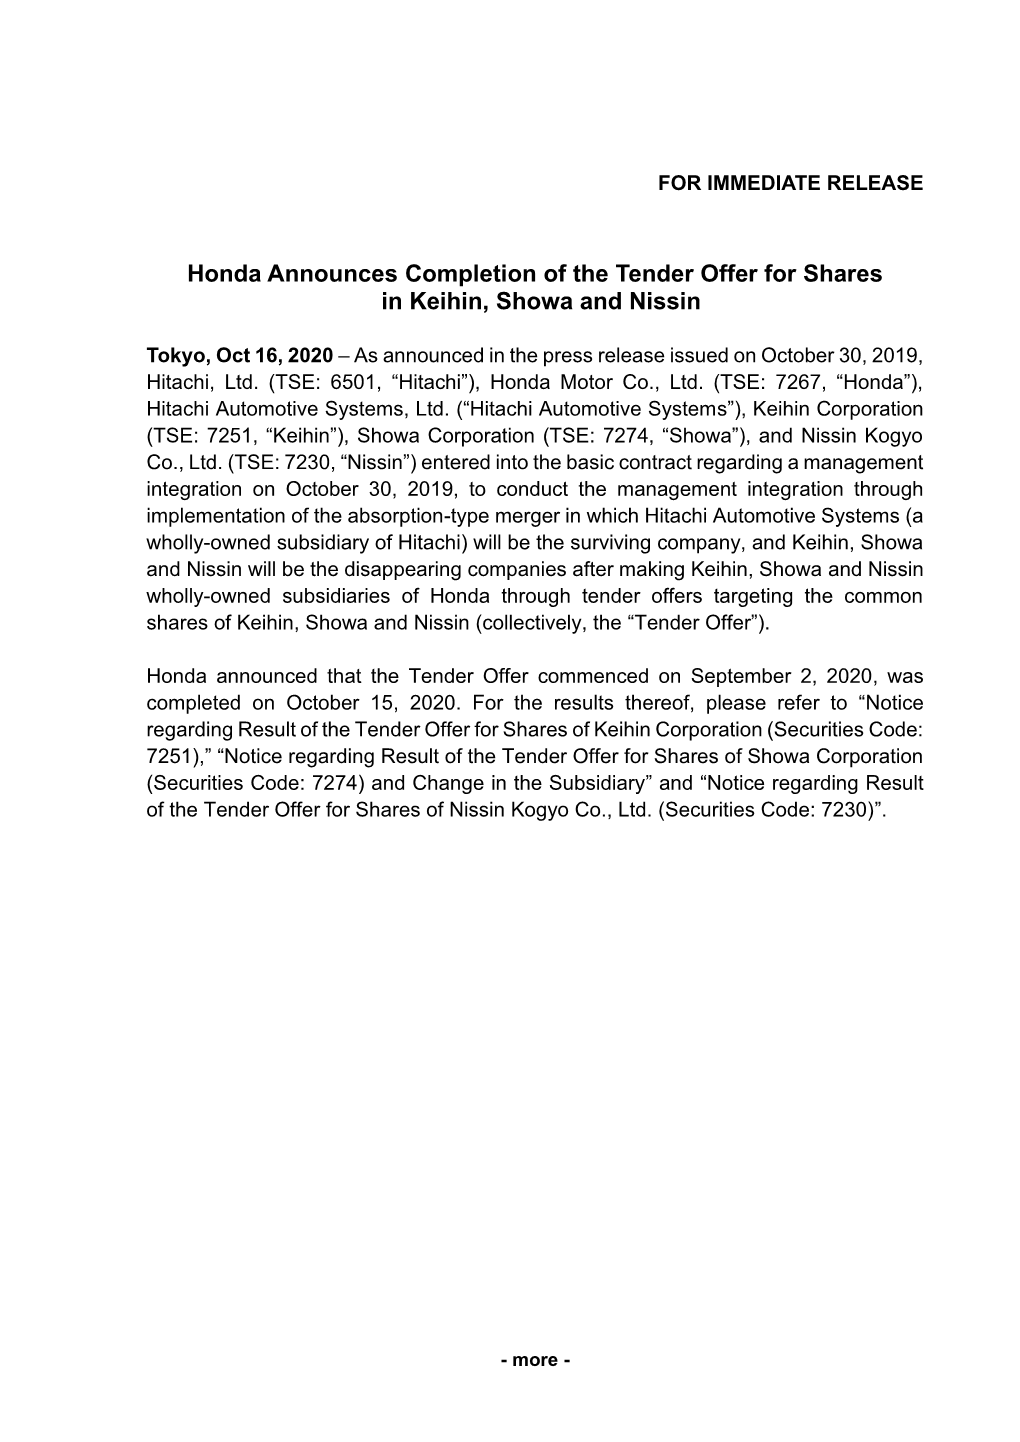 Honda Announces Completion of the Tender Offer for Shares in Keihin, Showa and Nissin